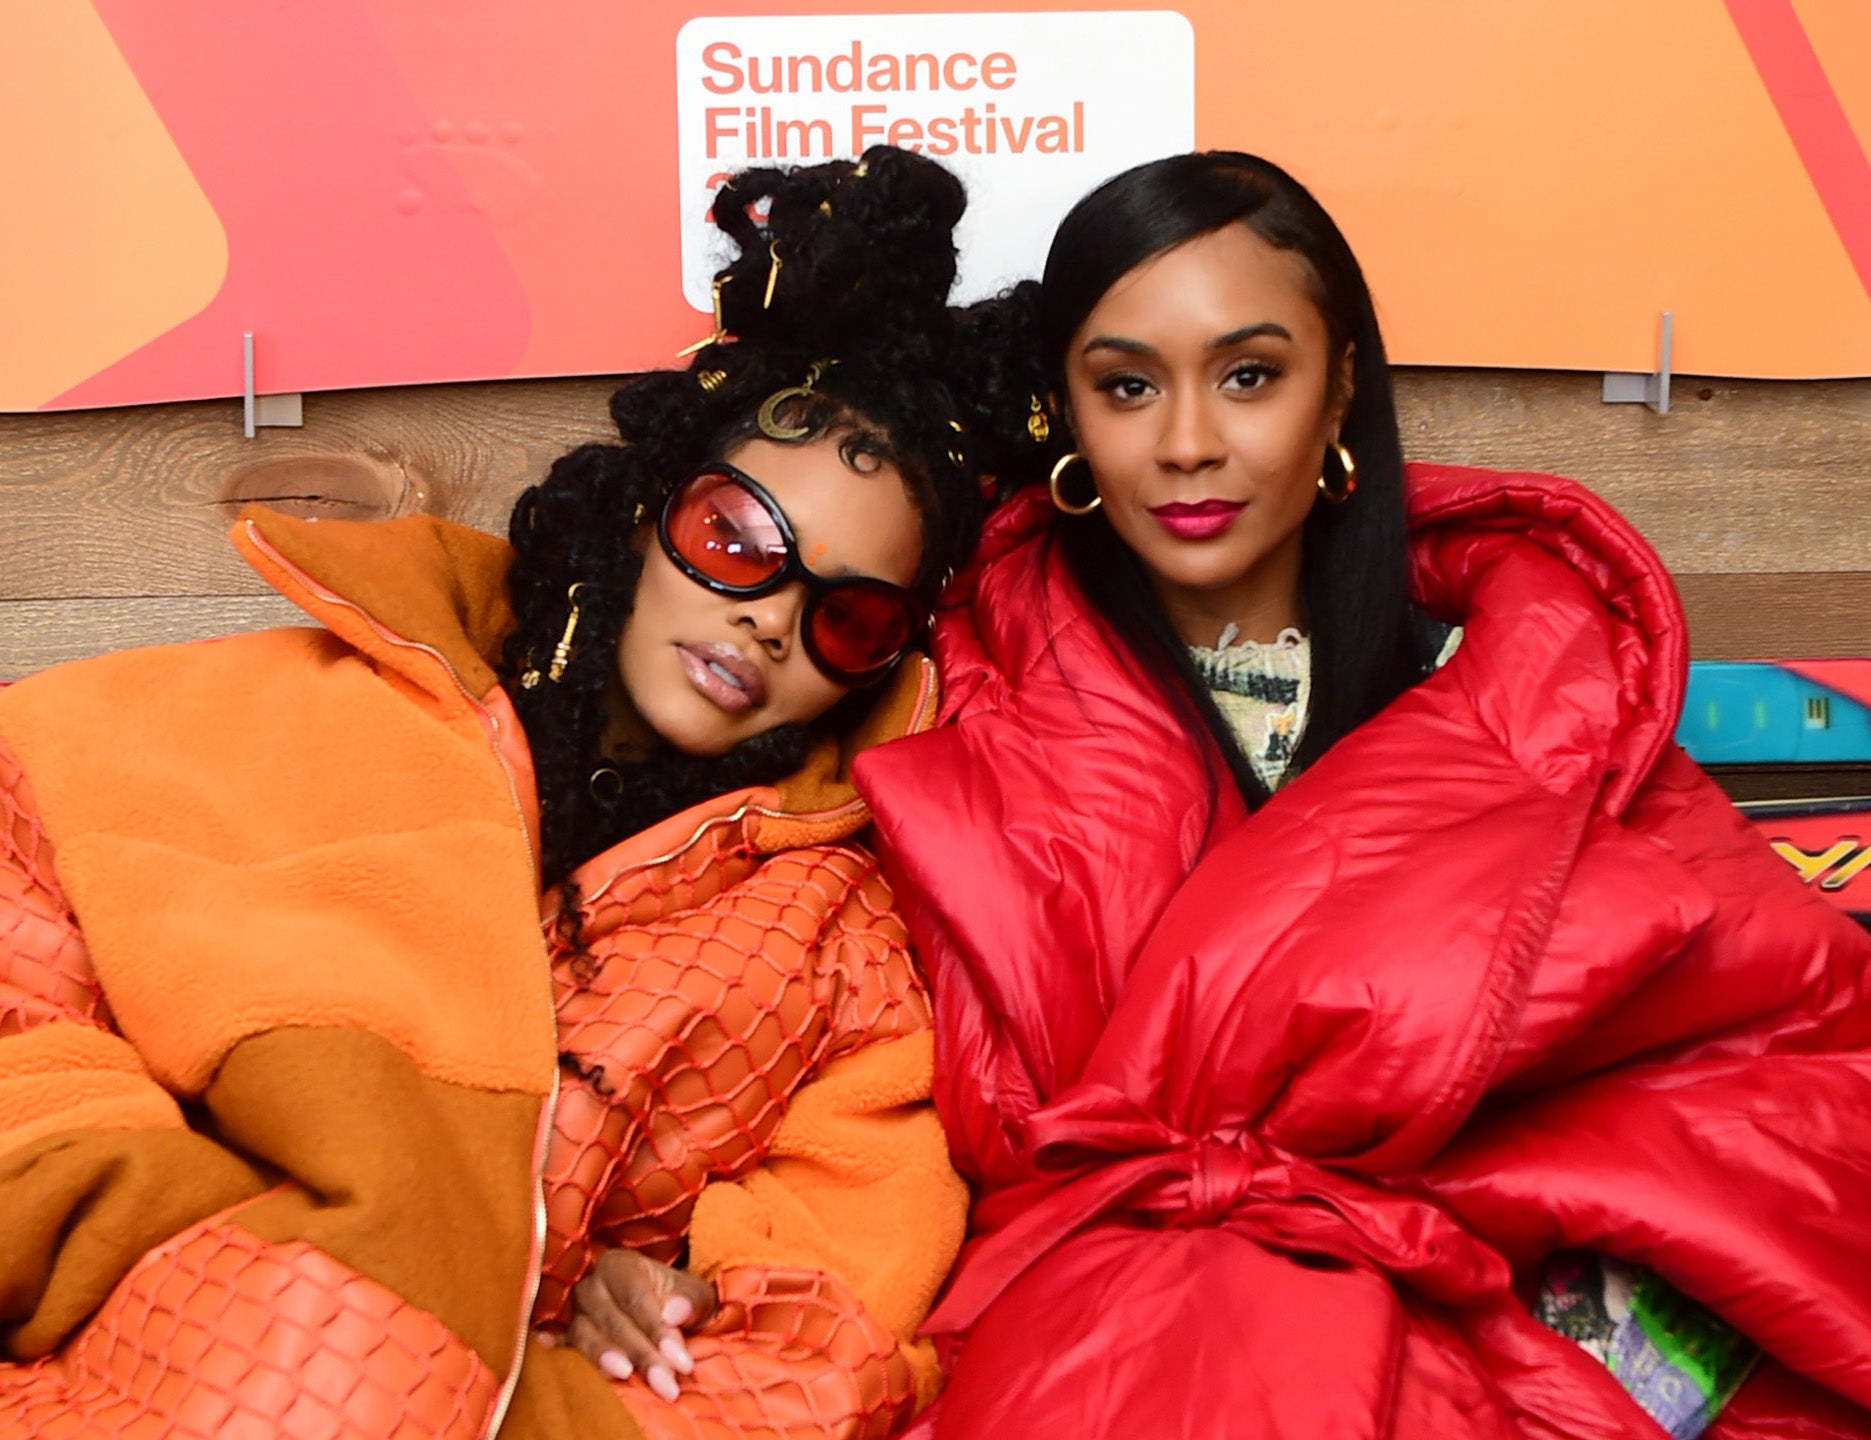 Director A.V. Rockwell Wins Sundance Grand Jury Prize With 'A Thousand And One' Starring Teyana Taylor